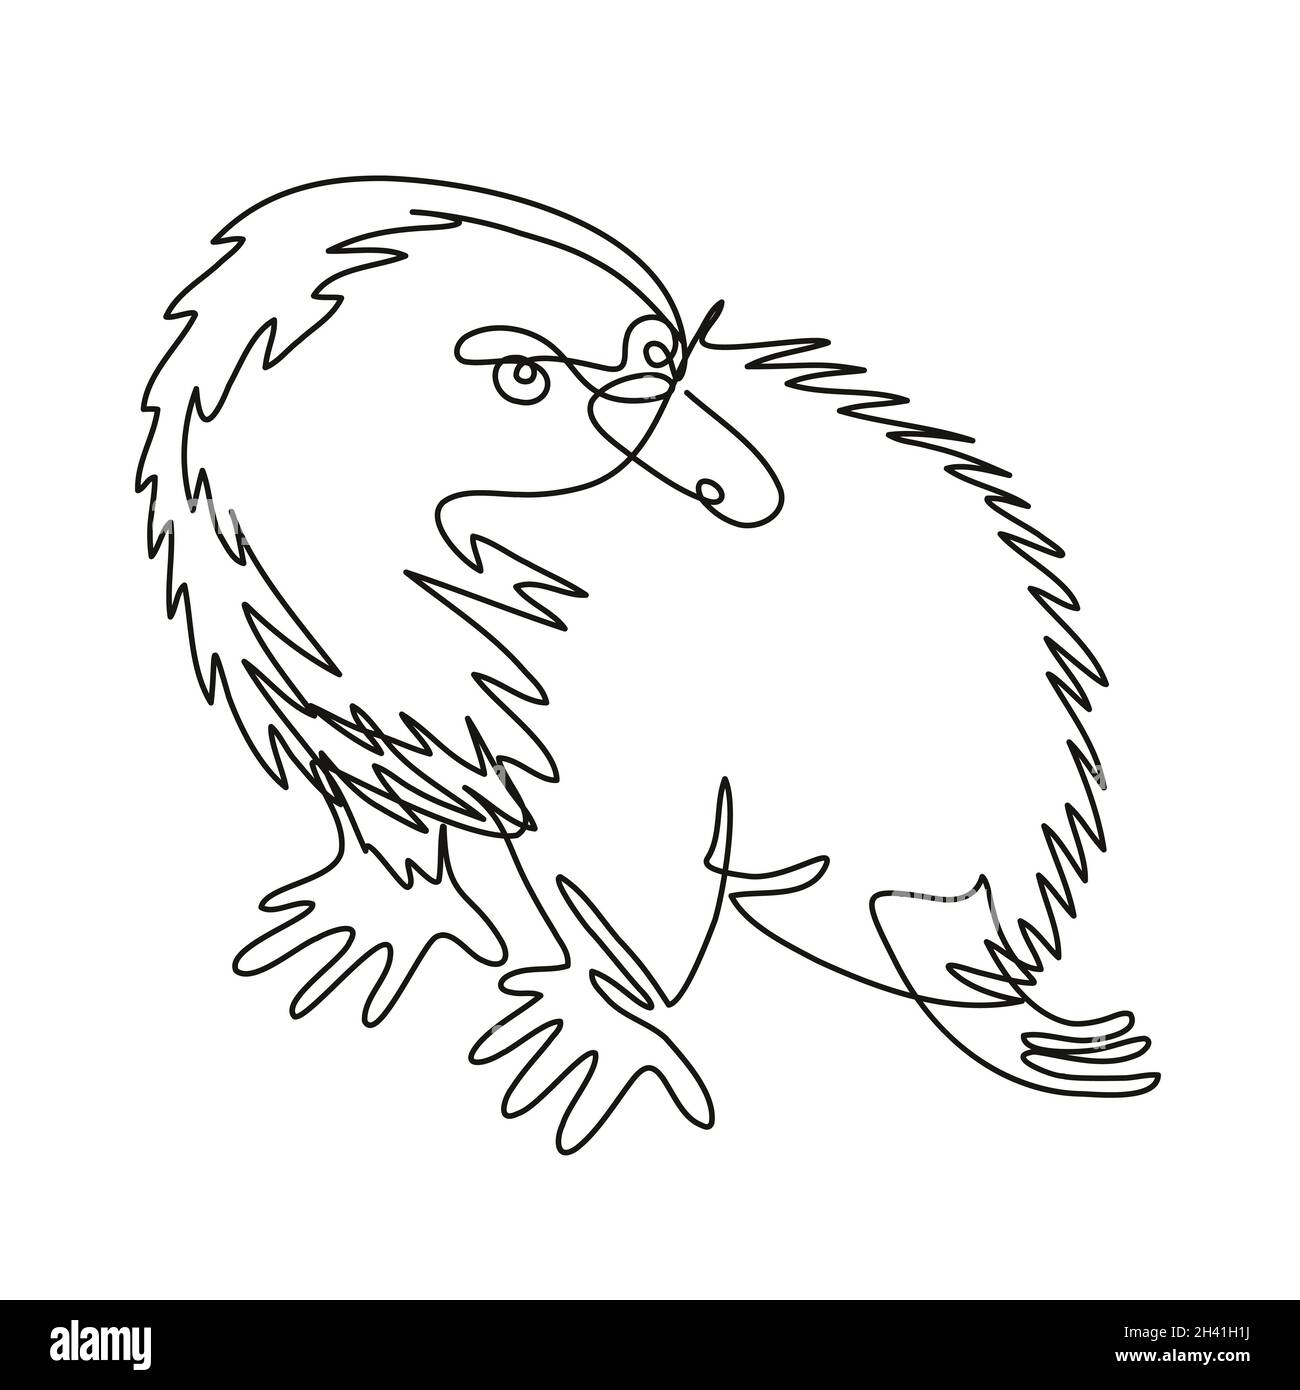 Echidna or Spiny Anteater Side View Continuous Line Drawing Stock Photo